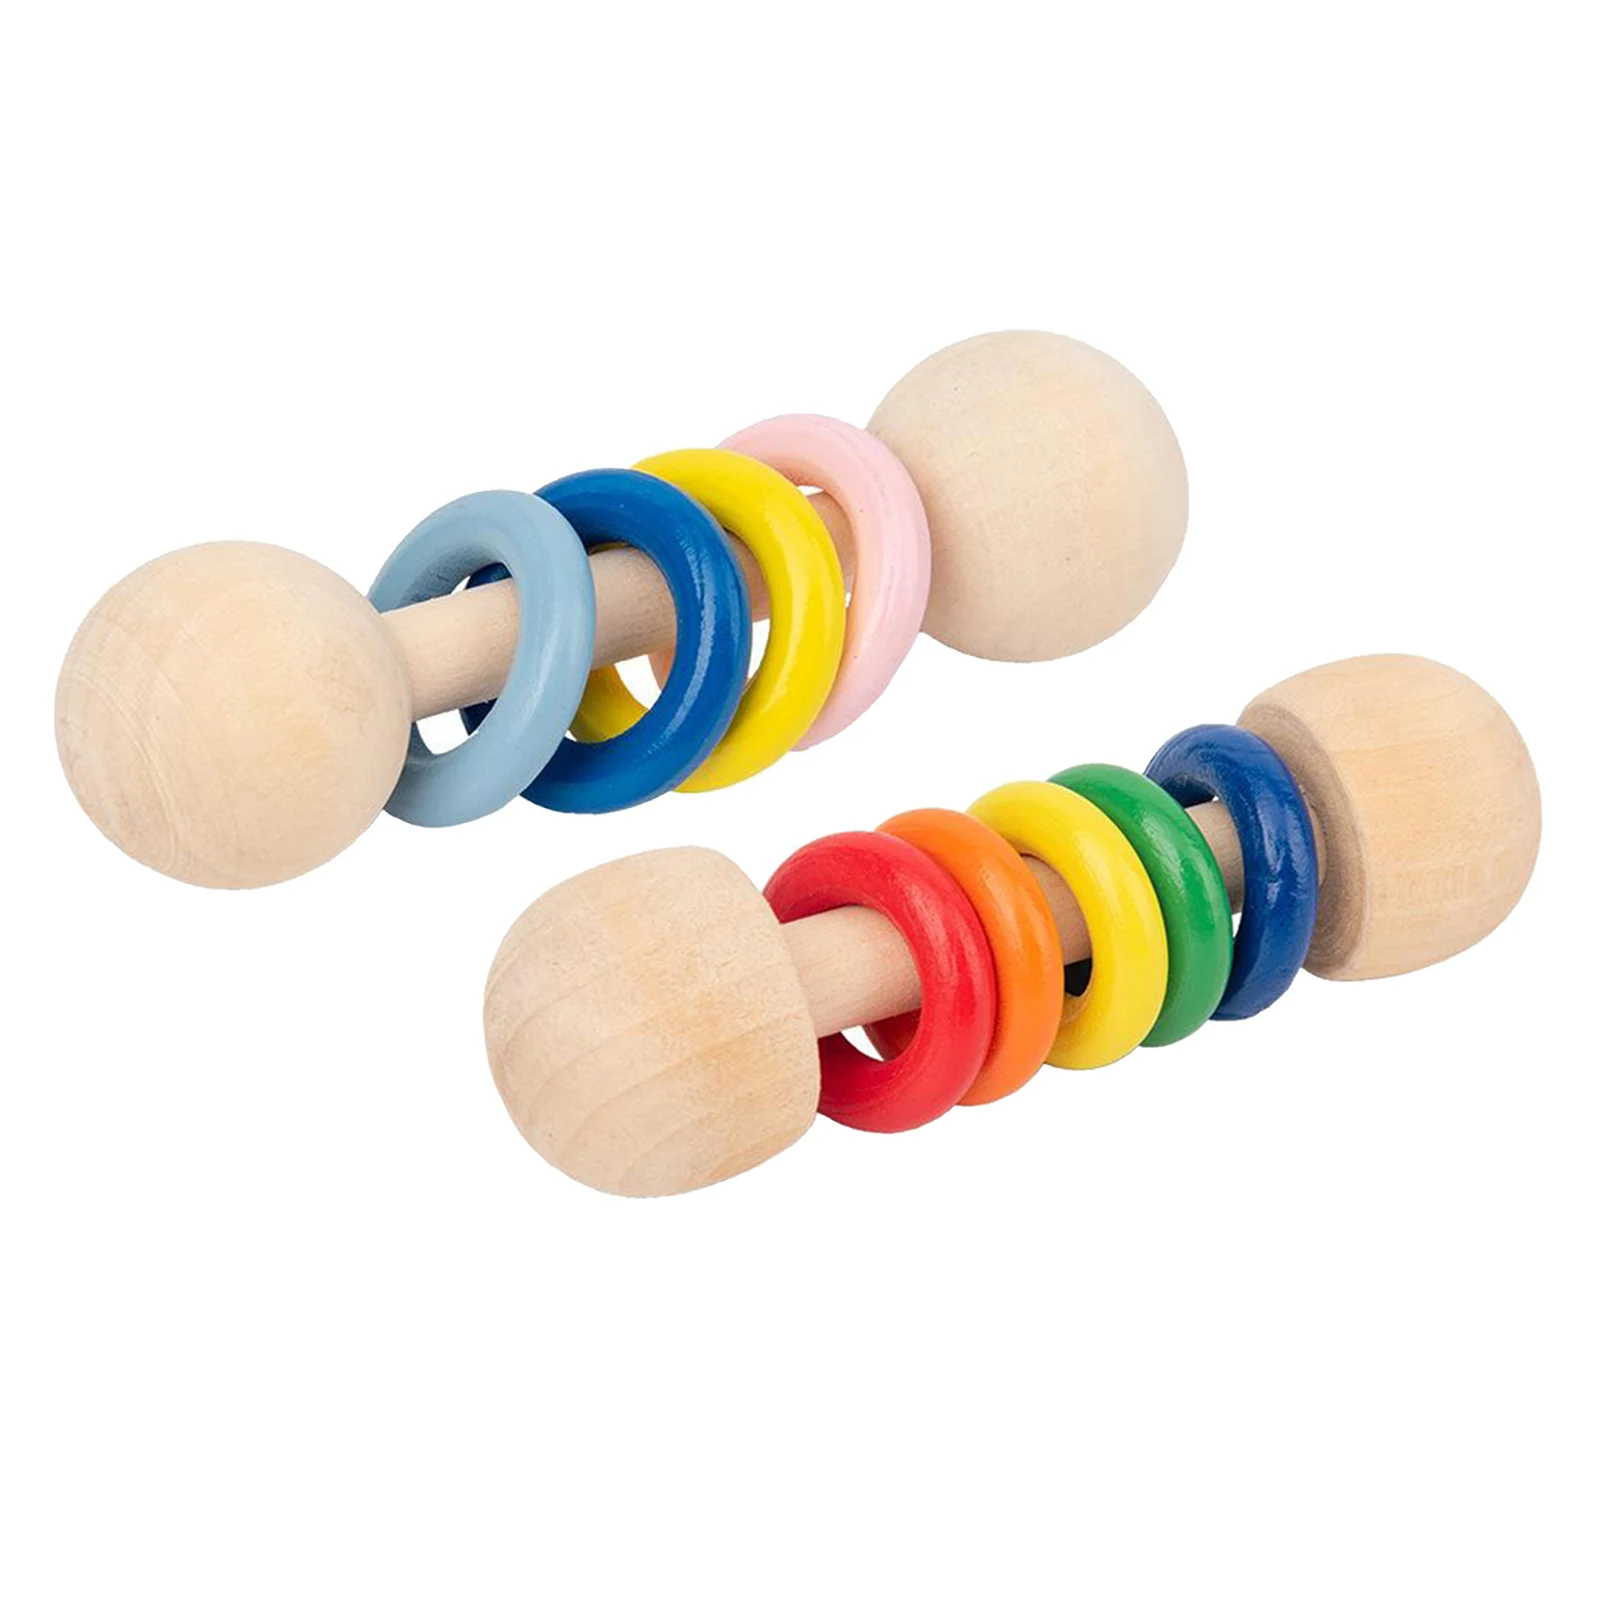 Wooden Baby Rattle Teether Montessori Grasping Shaking Teething Toy for Babies and Toddlers